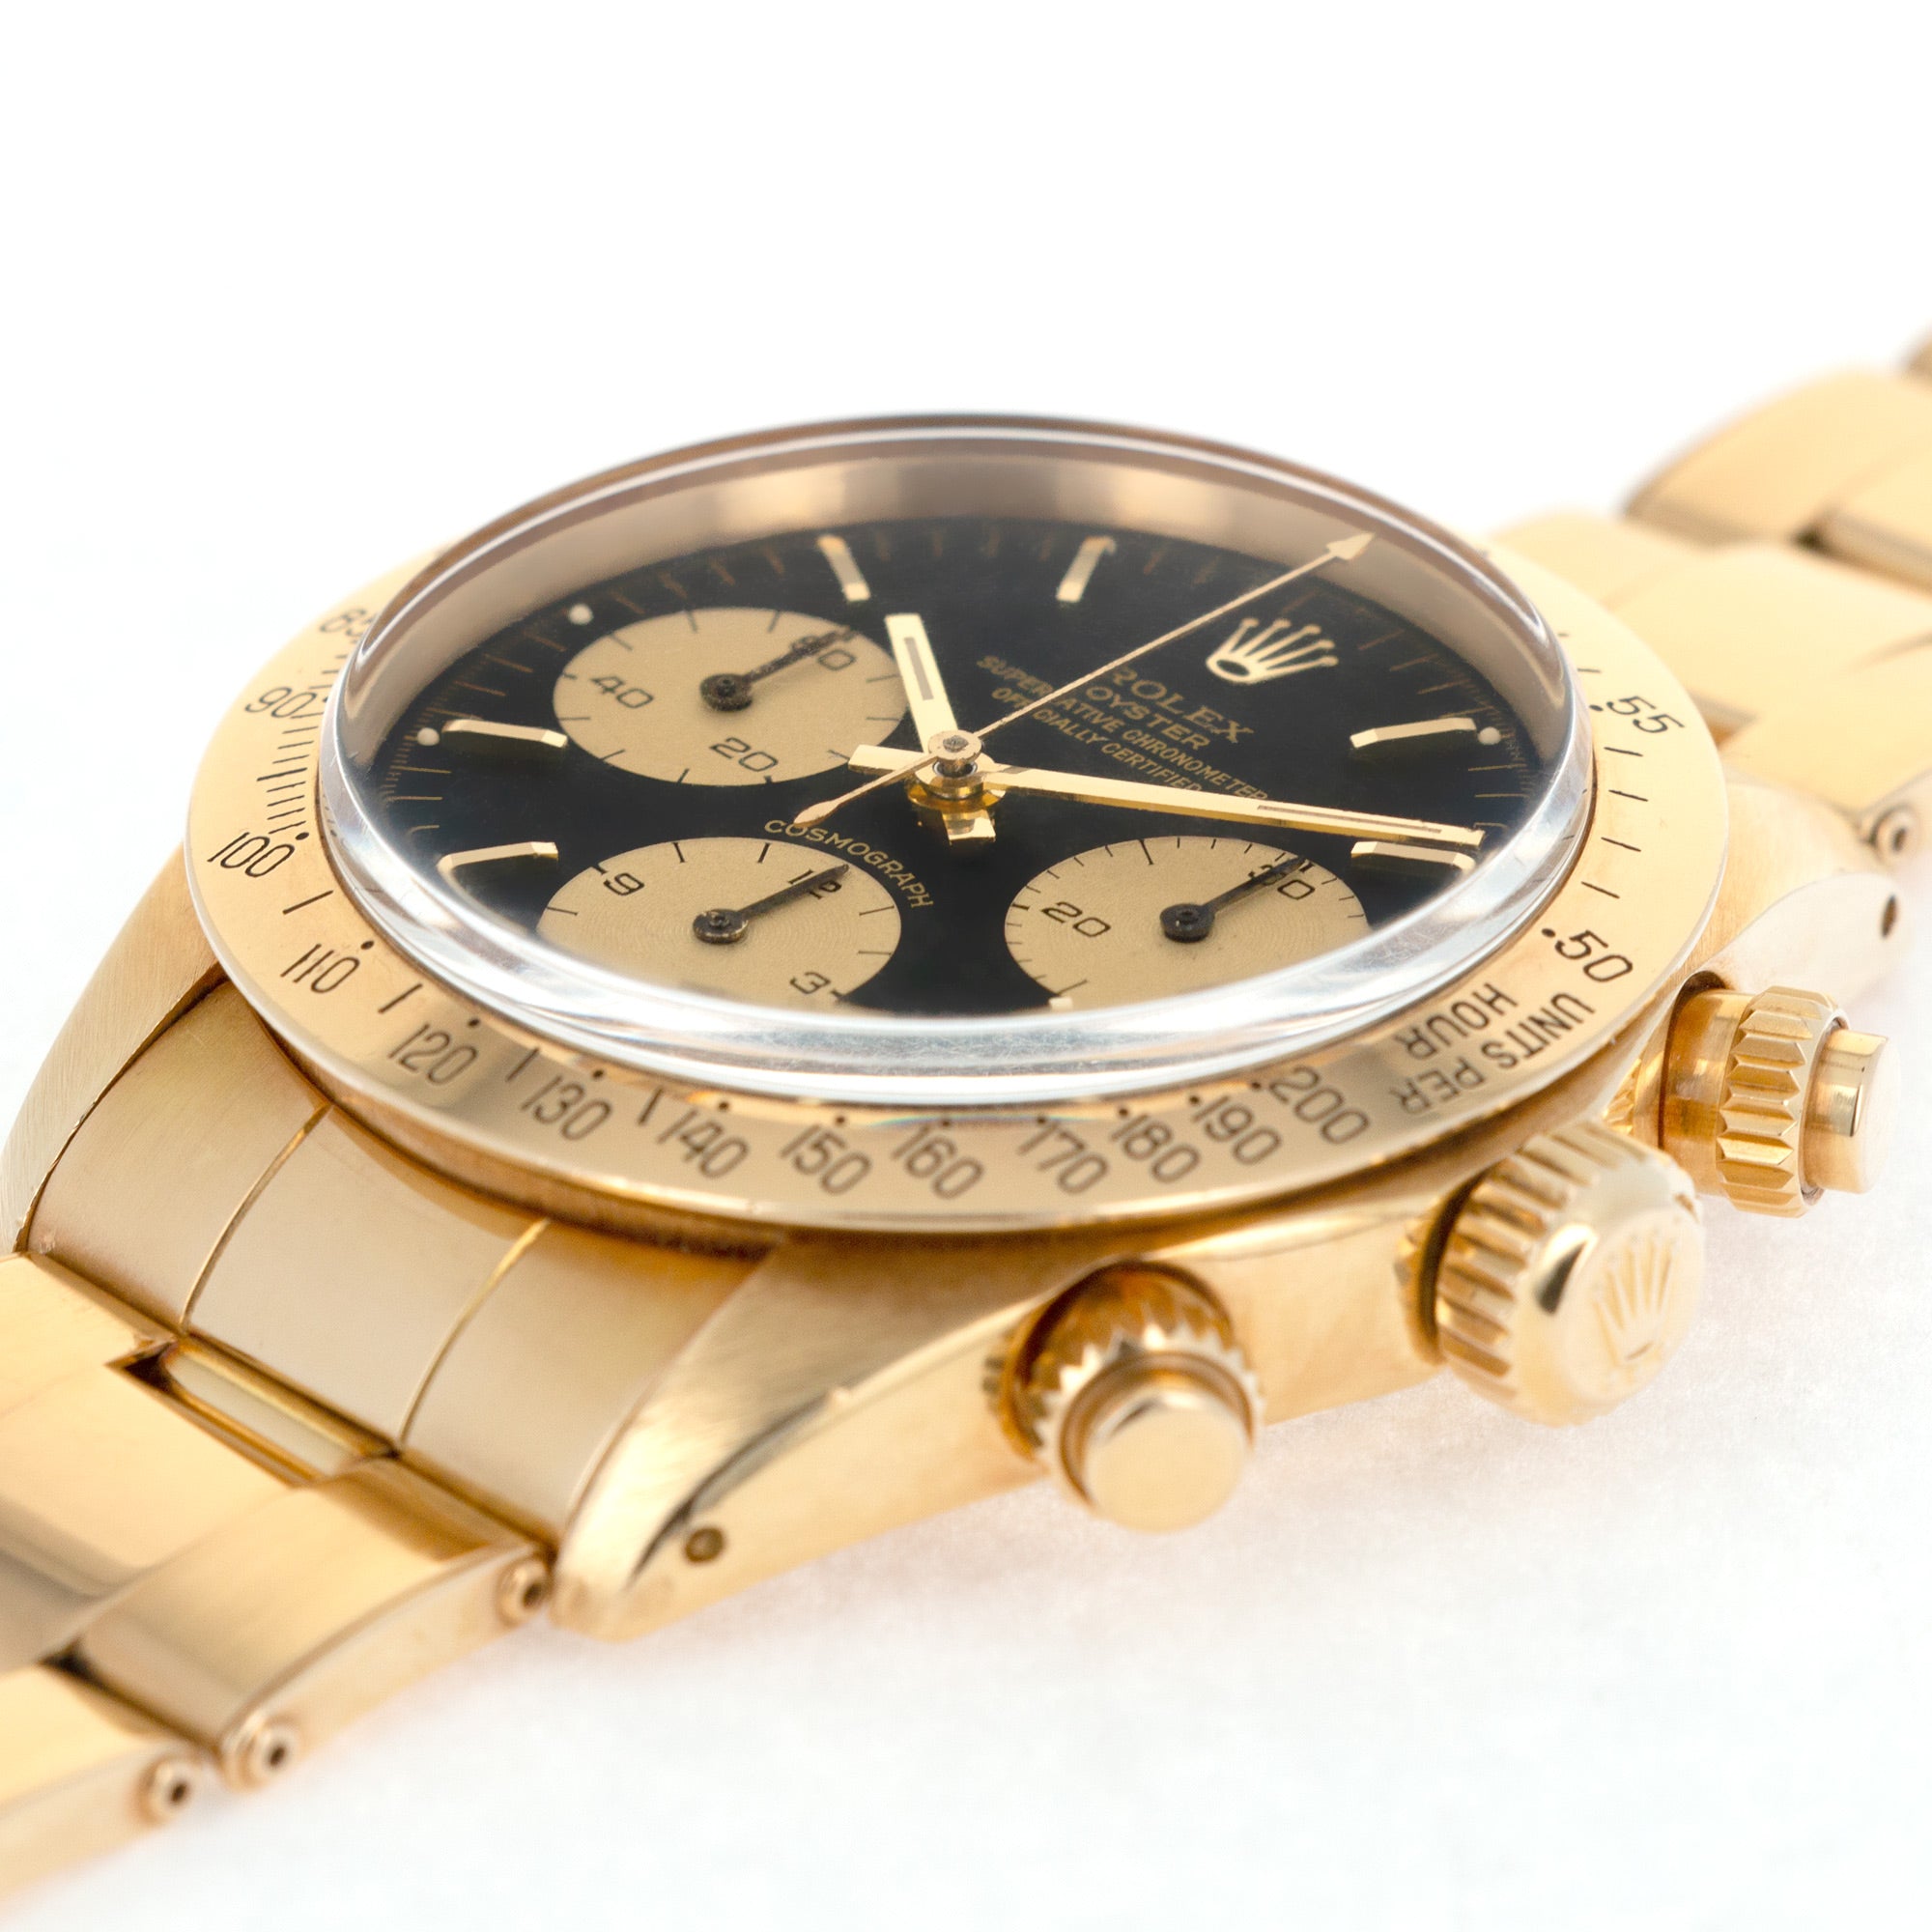 Rolex - Rolex Yellow Gold Cosmograph Daytona Watch Ref. 6265, with Original Box and Papers - The Keystone Watches